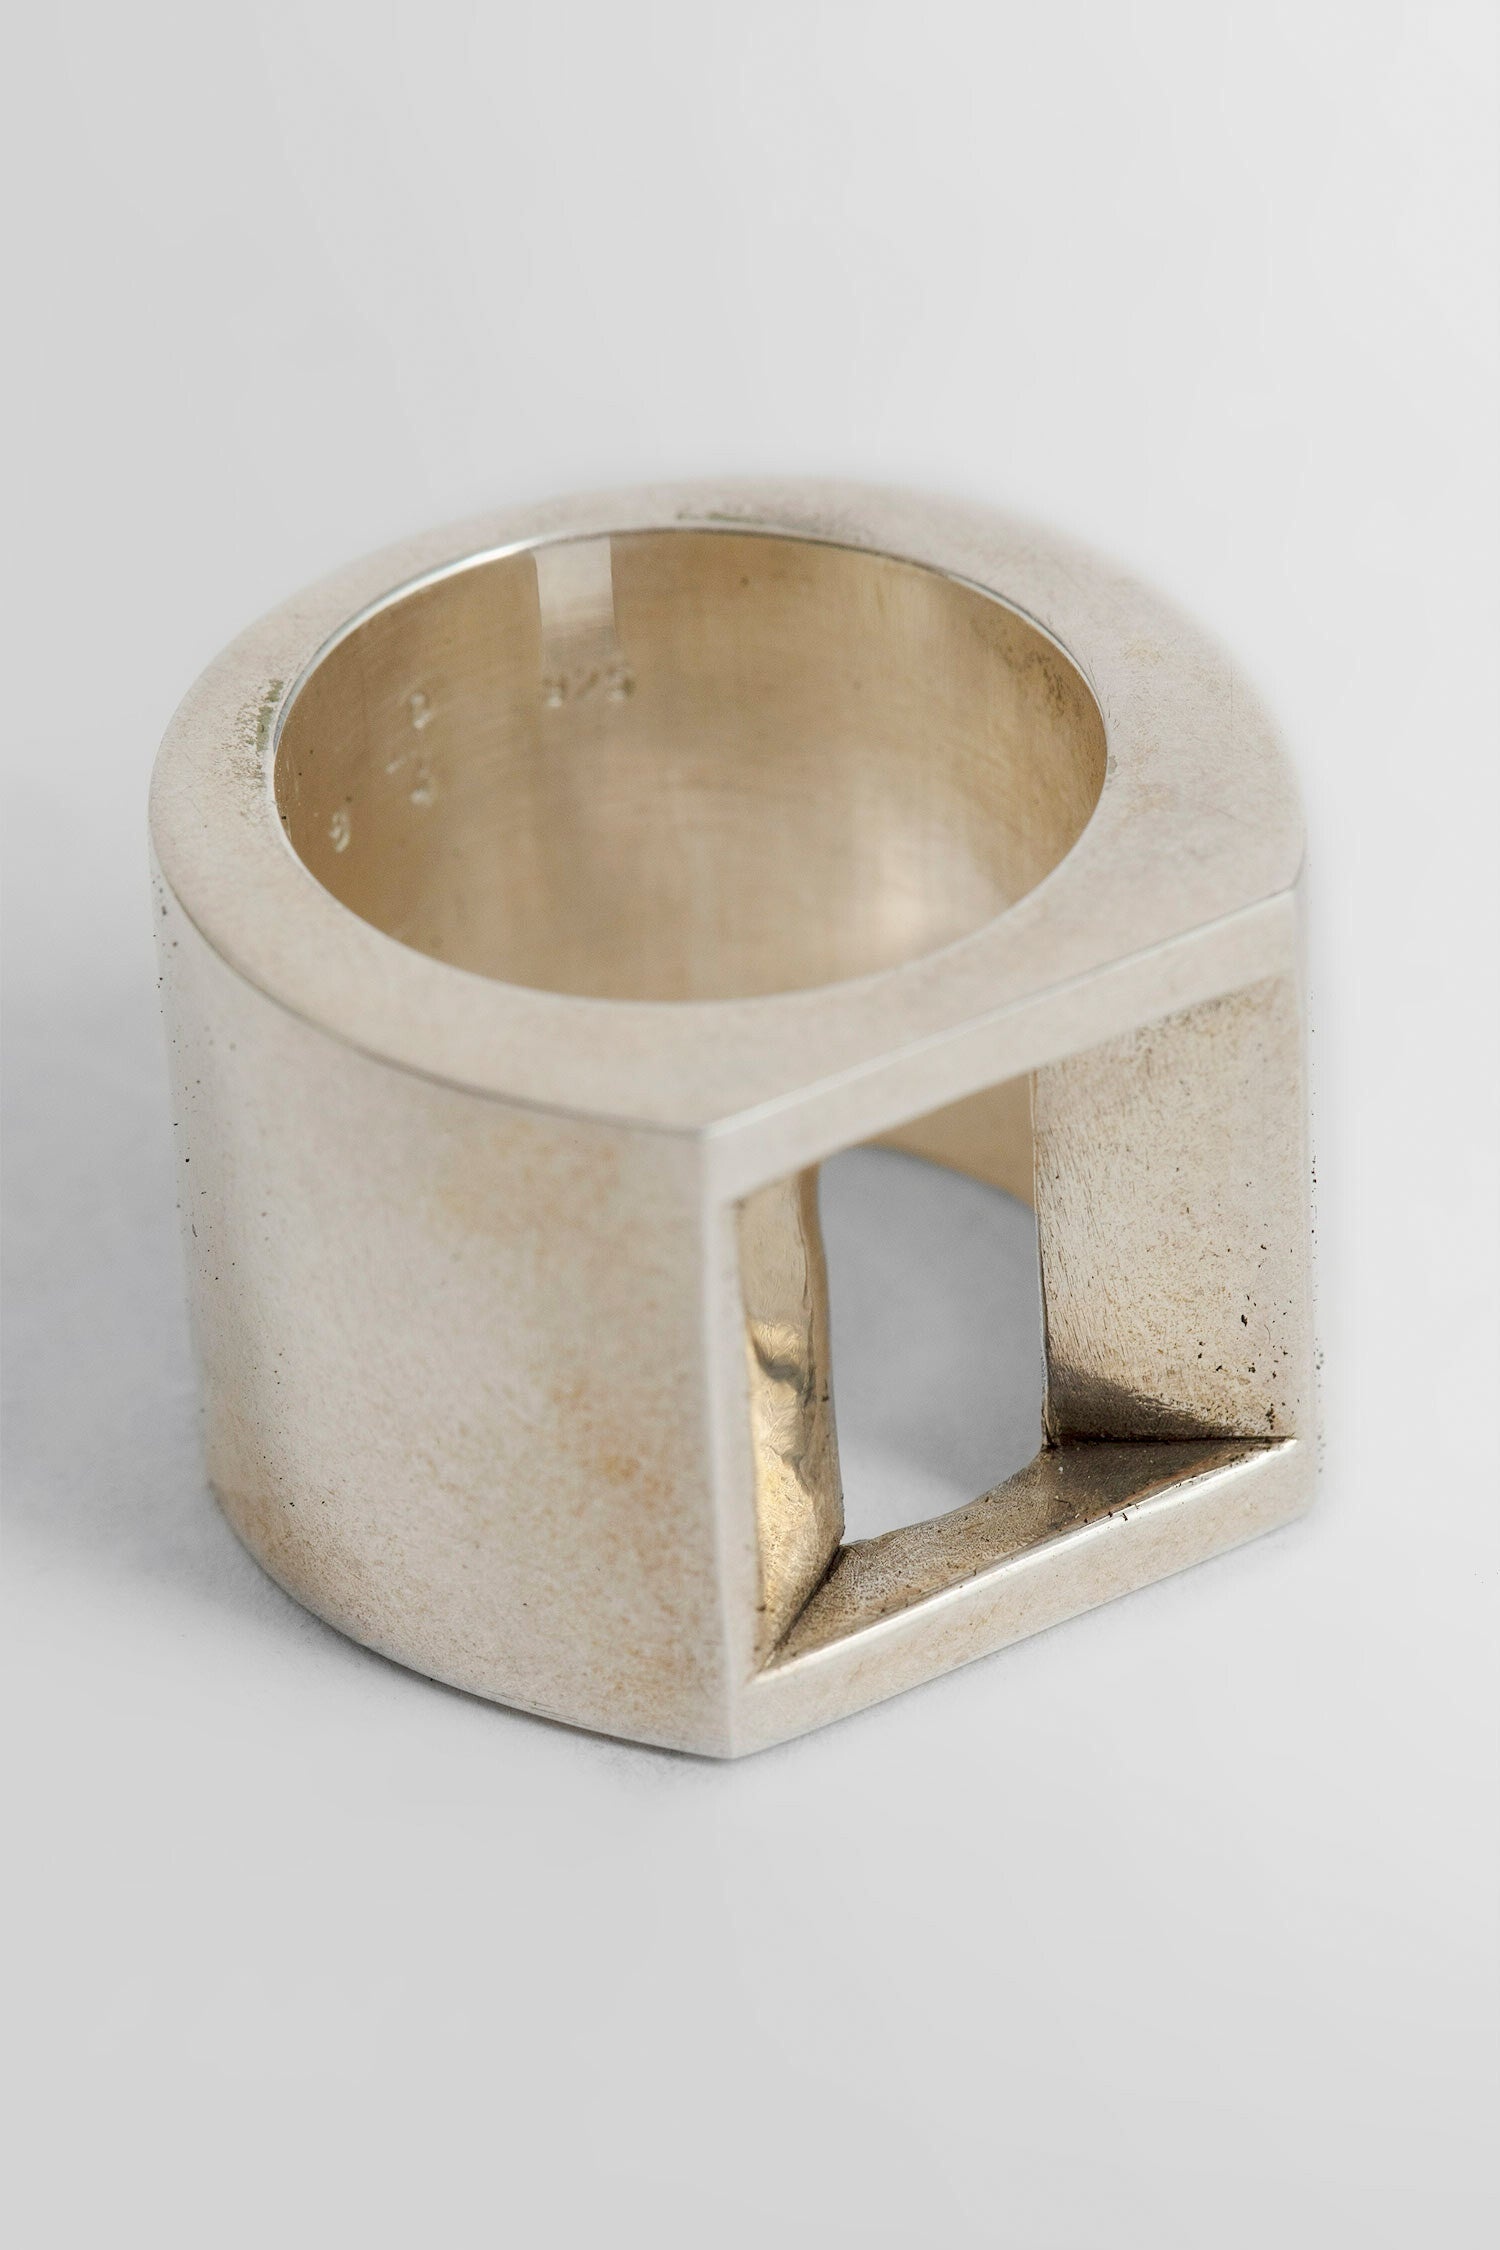 PARTS OF FOUR UNISEX SILVER RINGS - 4